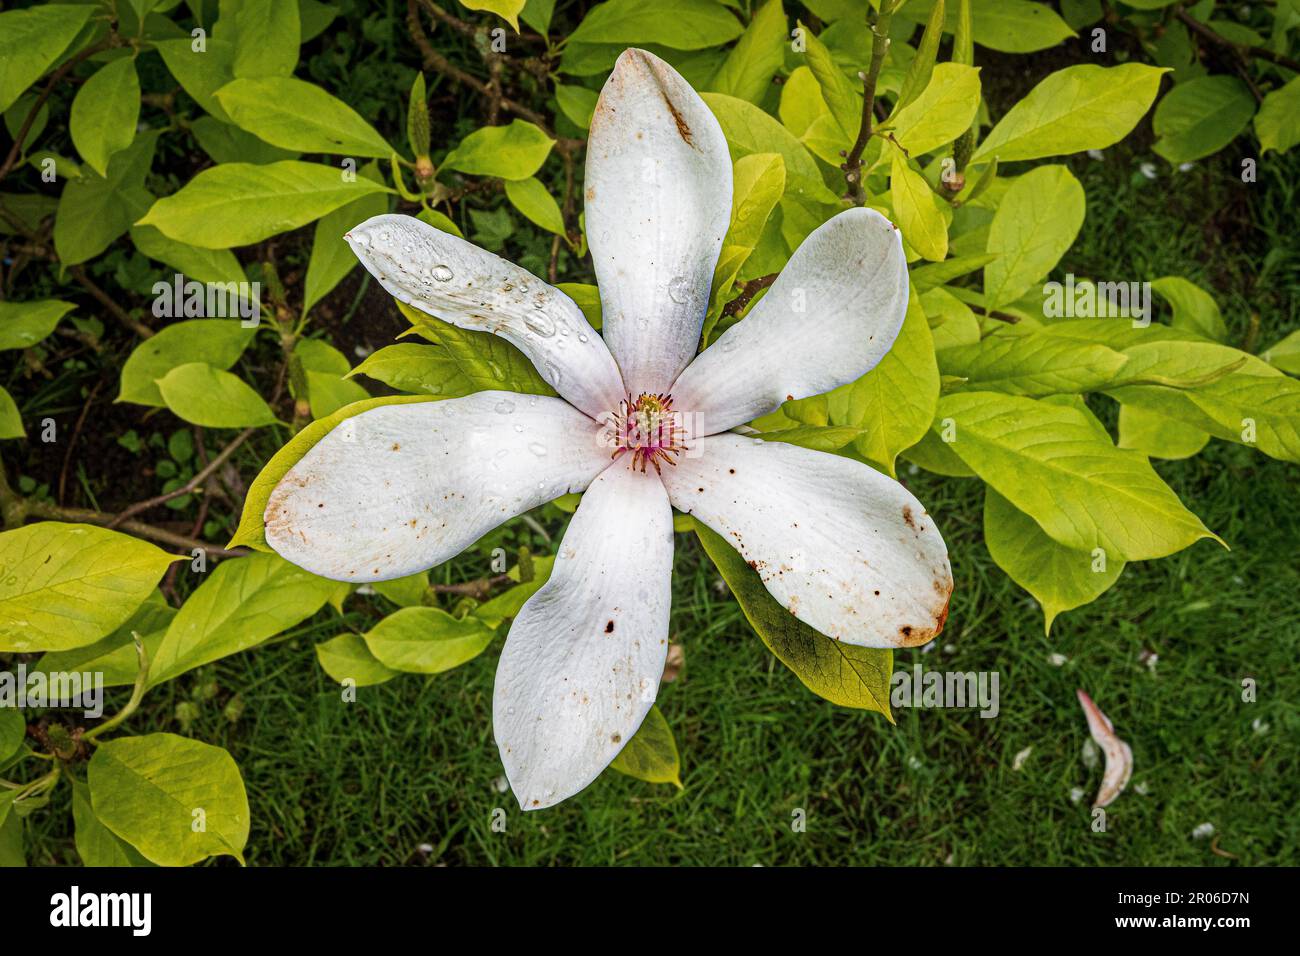 Magnolis Grandiflora flower with drops of rain water on the petals. Stock Photo